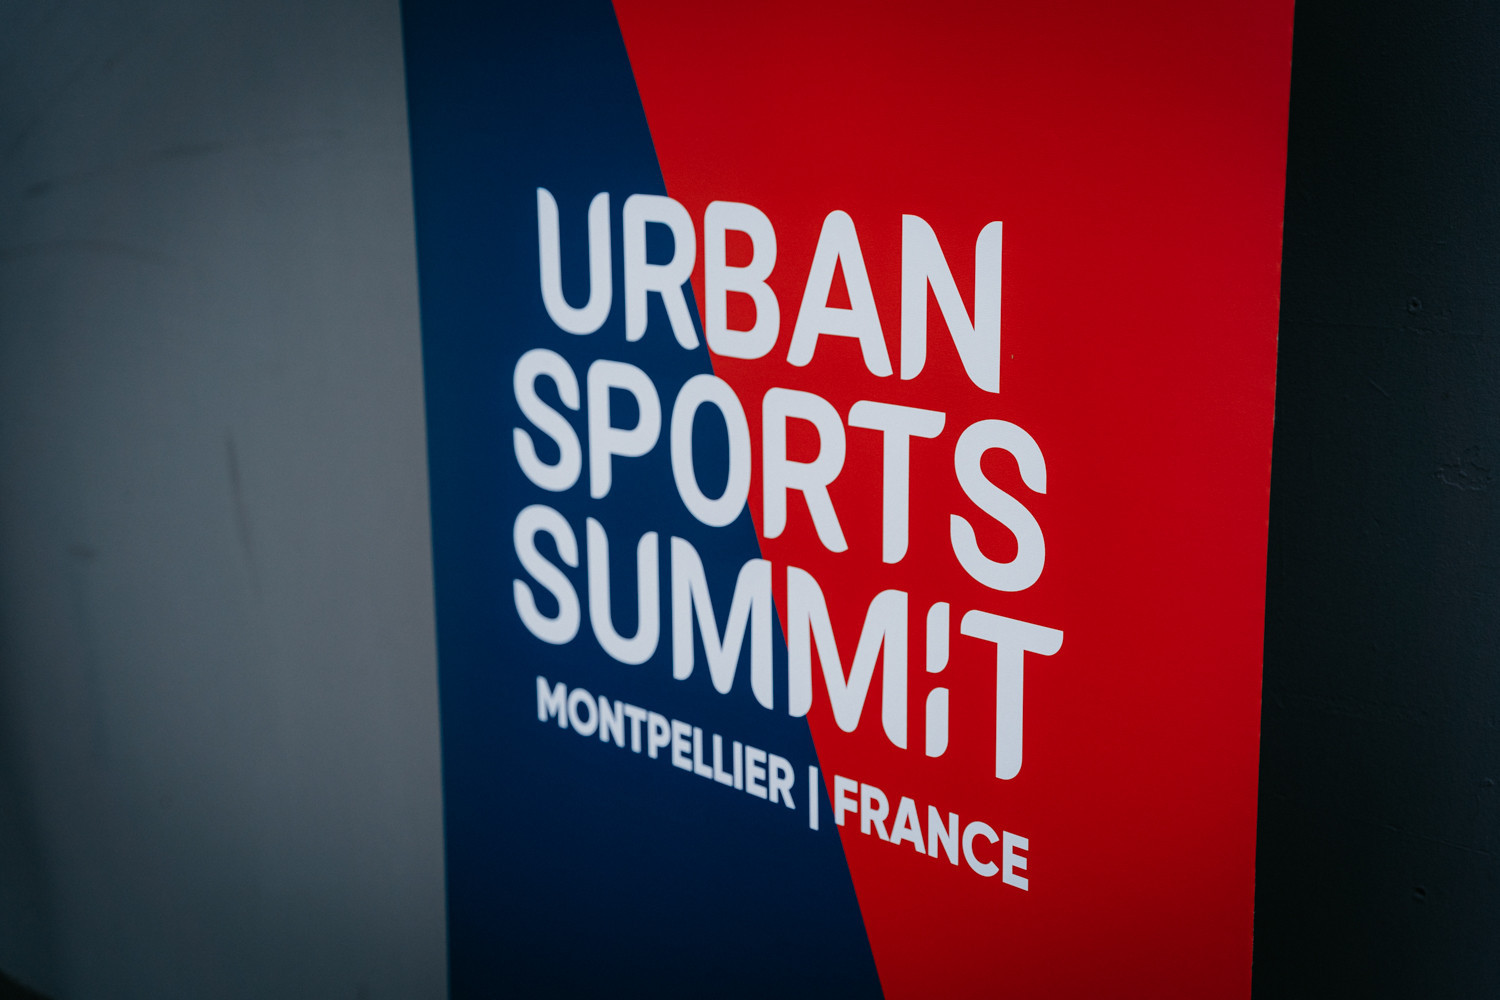 Montpellier welcomes key stakeholders as Urban Sports Summit underway in-person for first time in three years